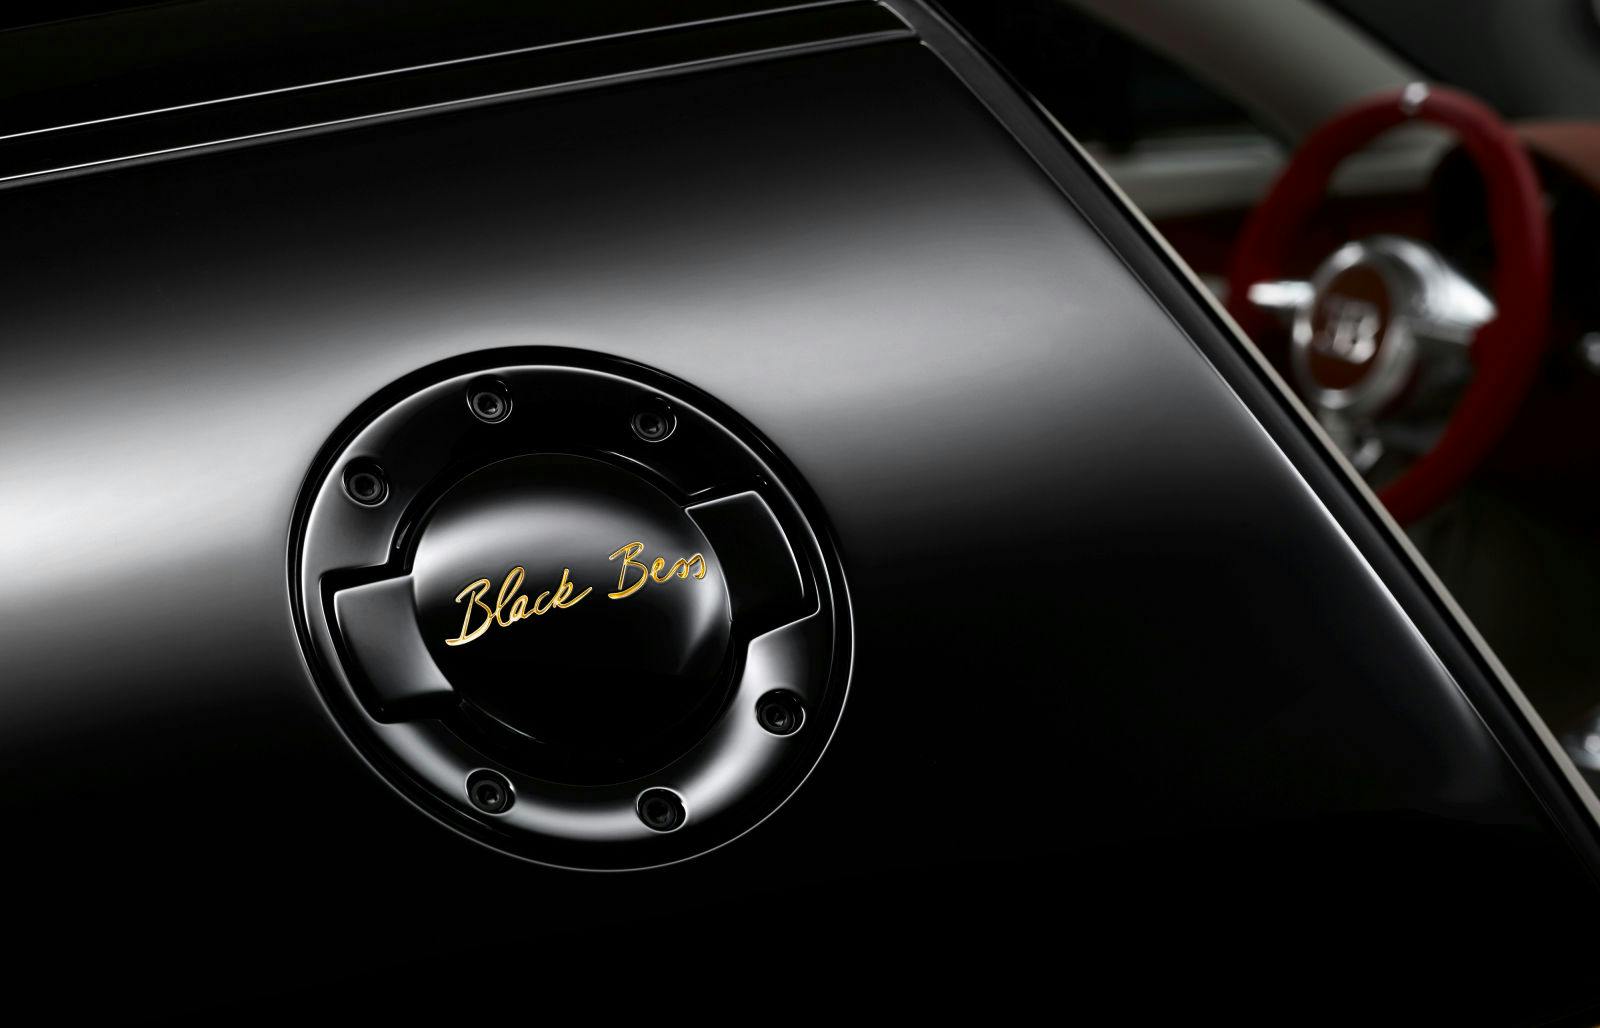 Bugatti Legend Black Bess": Fuel cap engraved with the "Black Bess" nameplate and elegantly finished with gold paint"